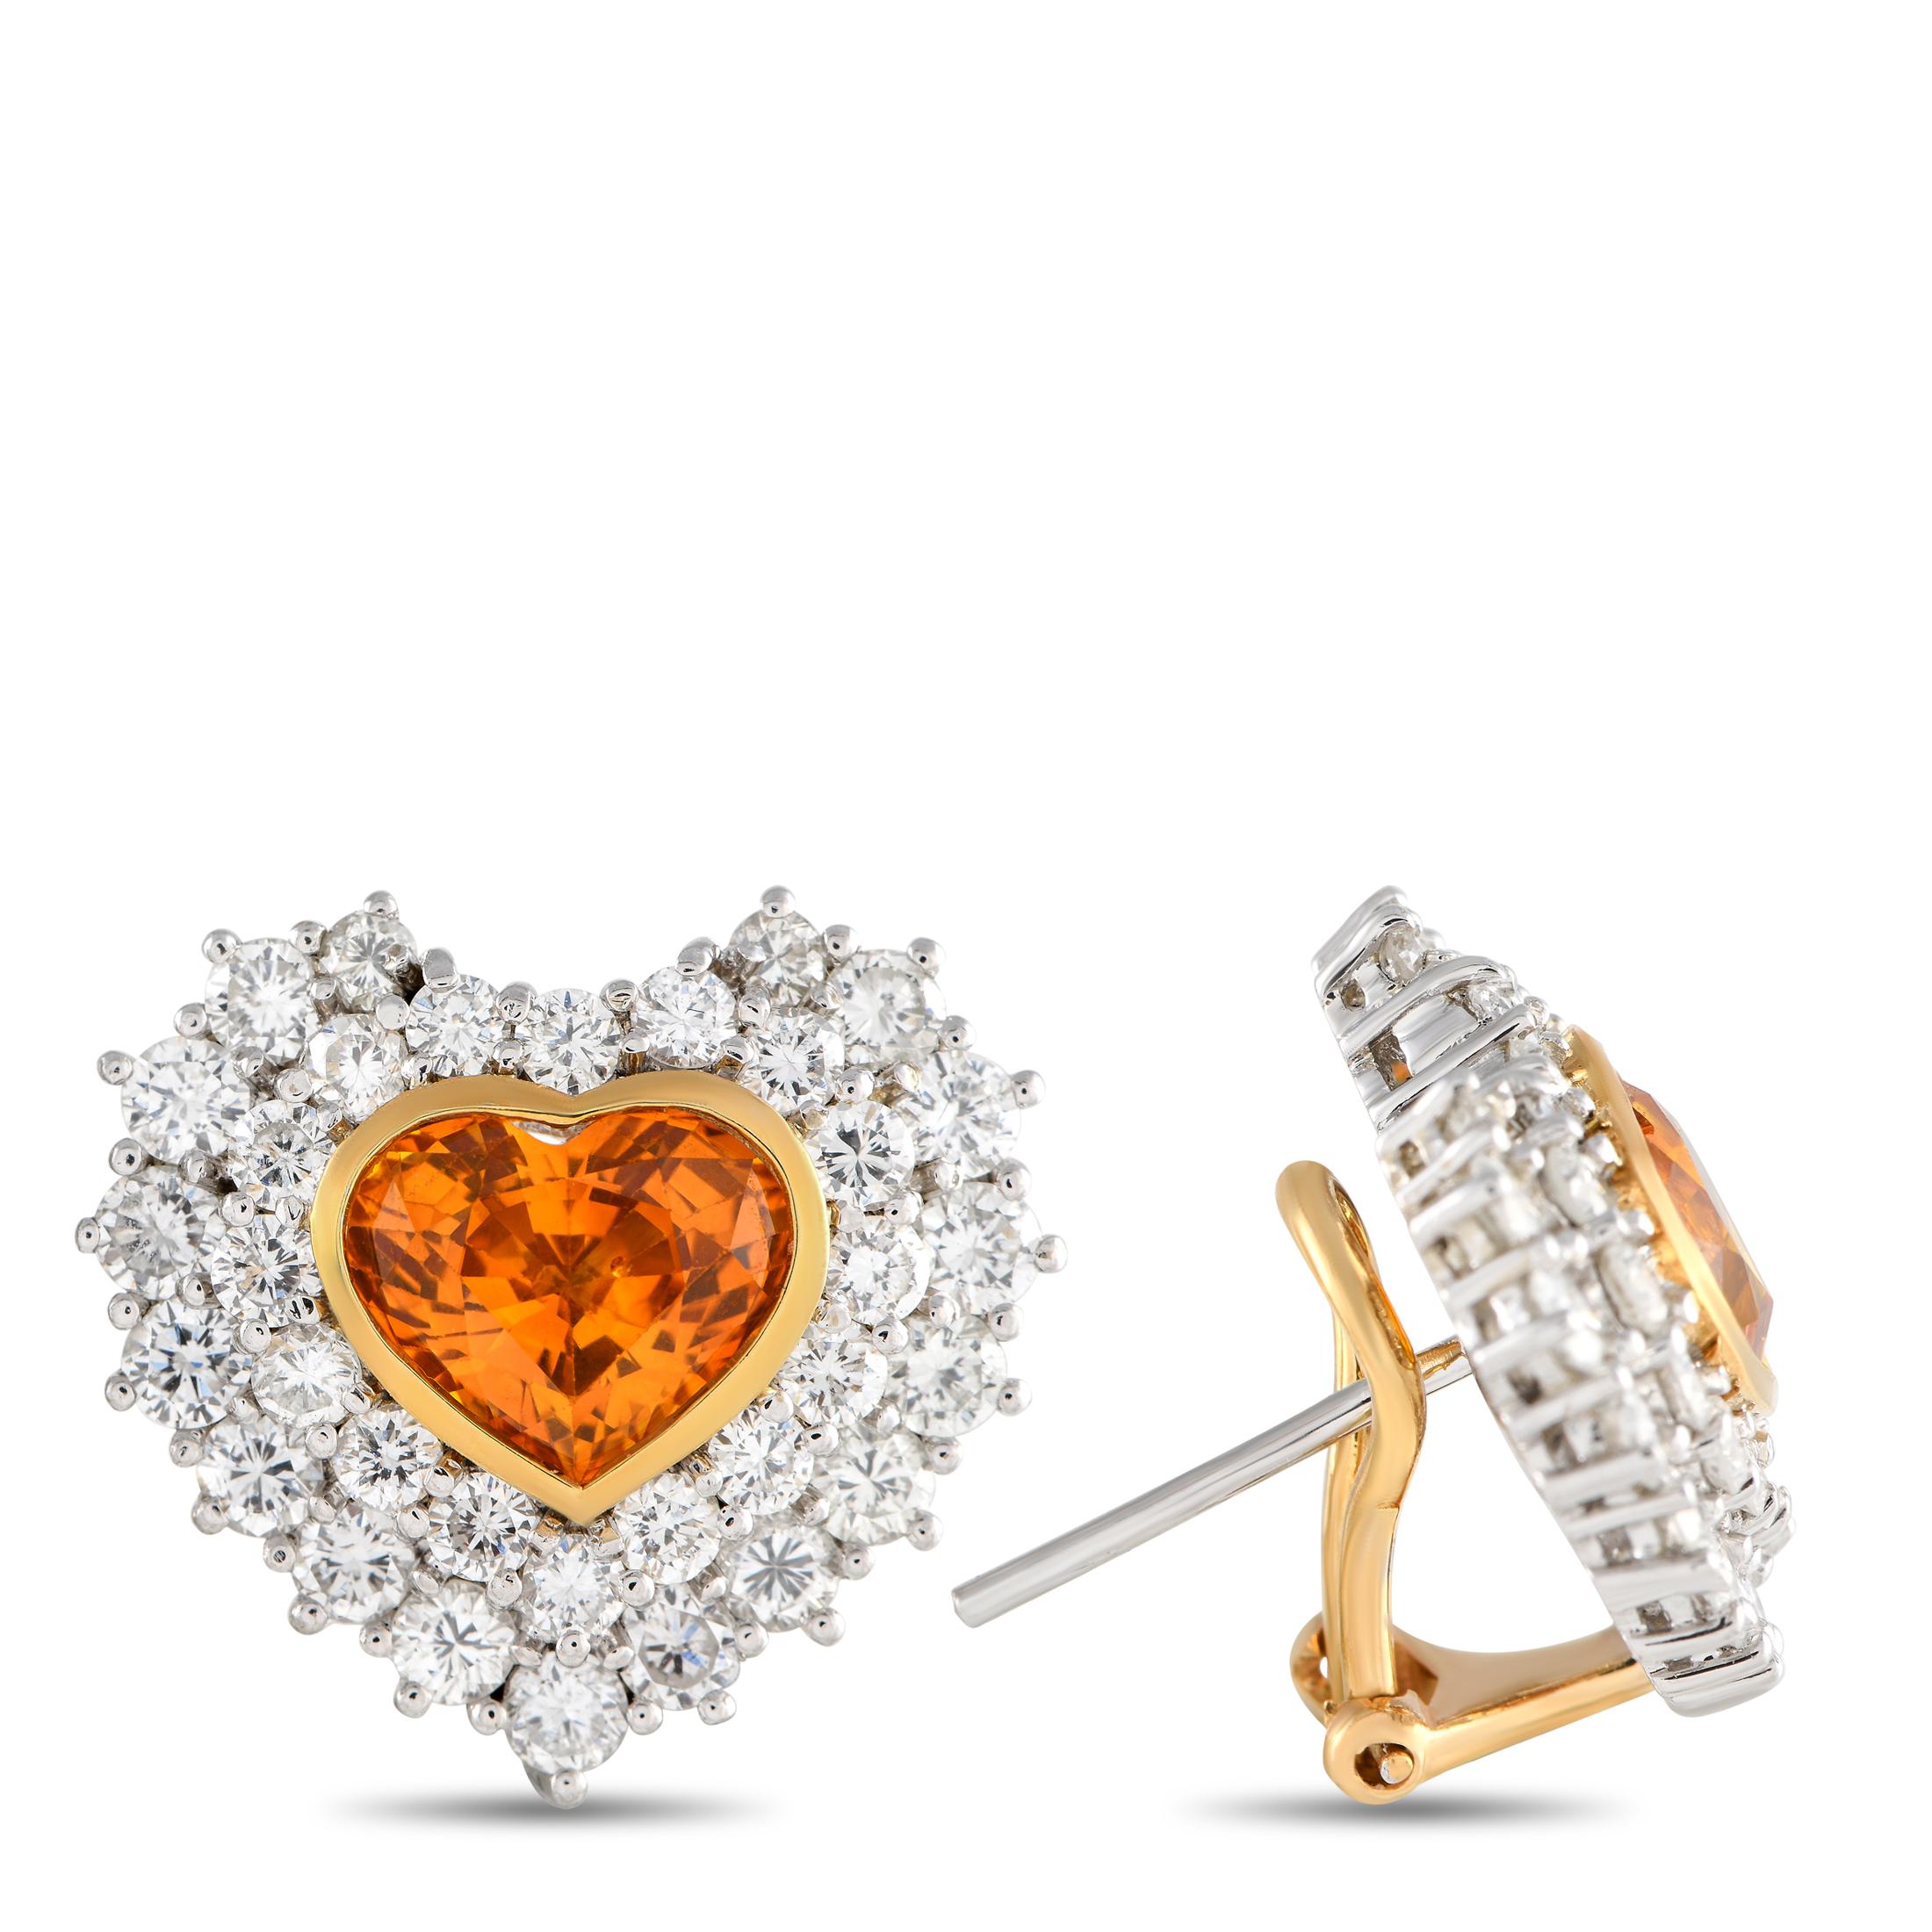 True romantics will instantly fall in love with the elegant glow of these earrings. They feature a gorgeous heart-shaped sapphire set on an 18K yellow gold bezel. Surrounding the faceted gem are tiny round diamonds that also form a heart silhouette.